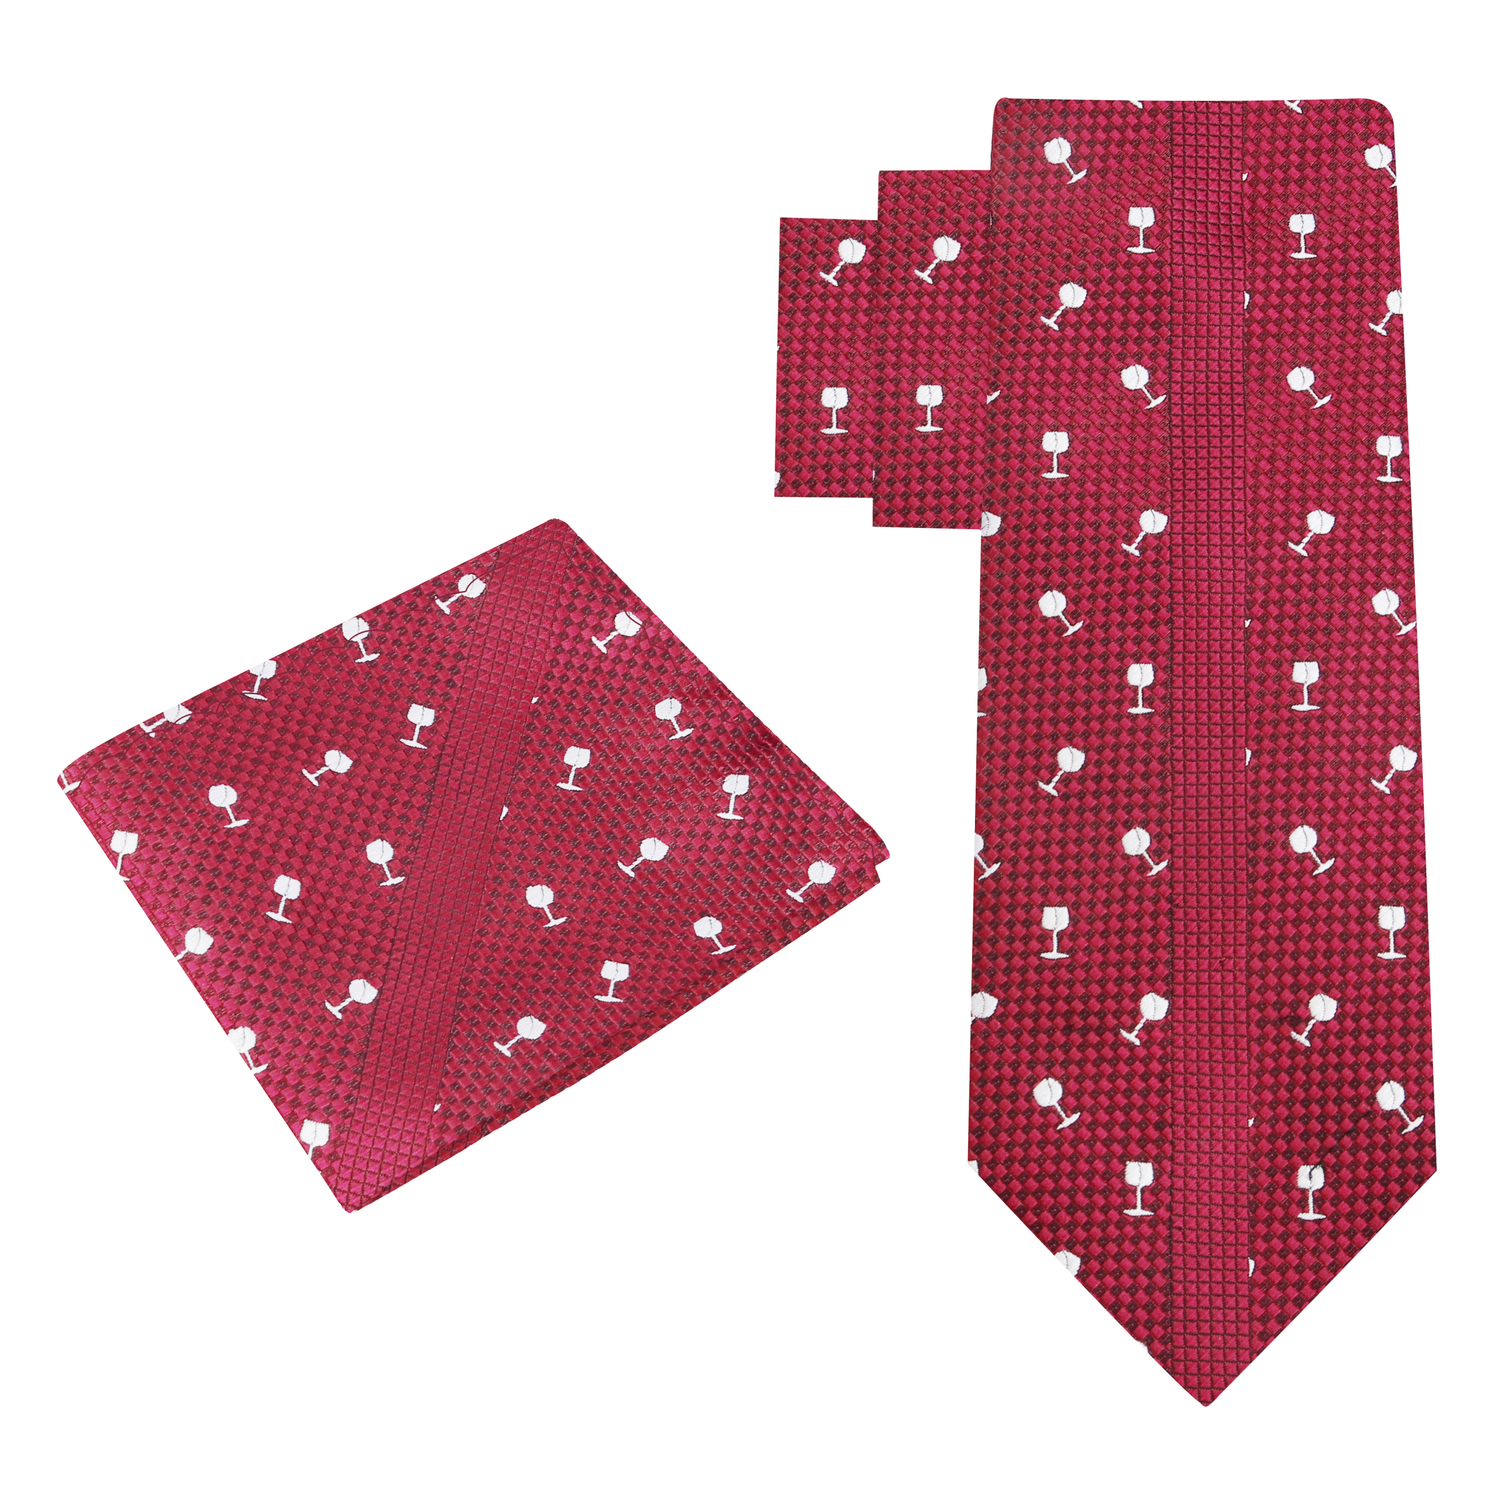 Alt View: Deep Red with Light Grey Wine Glasses Necktie and Matching Square